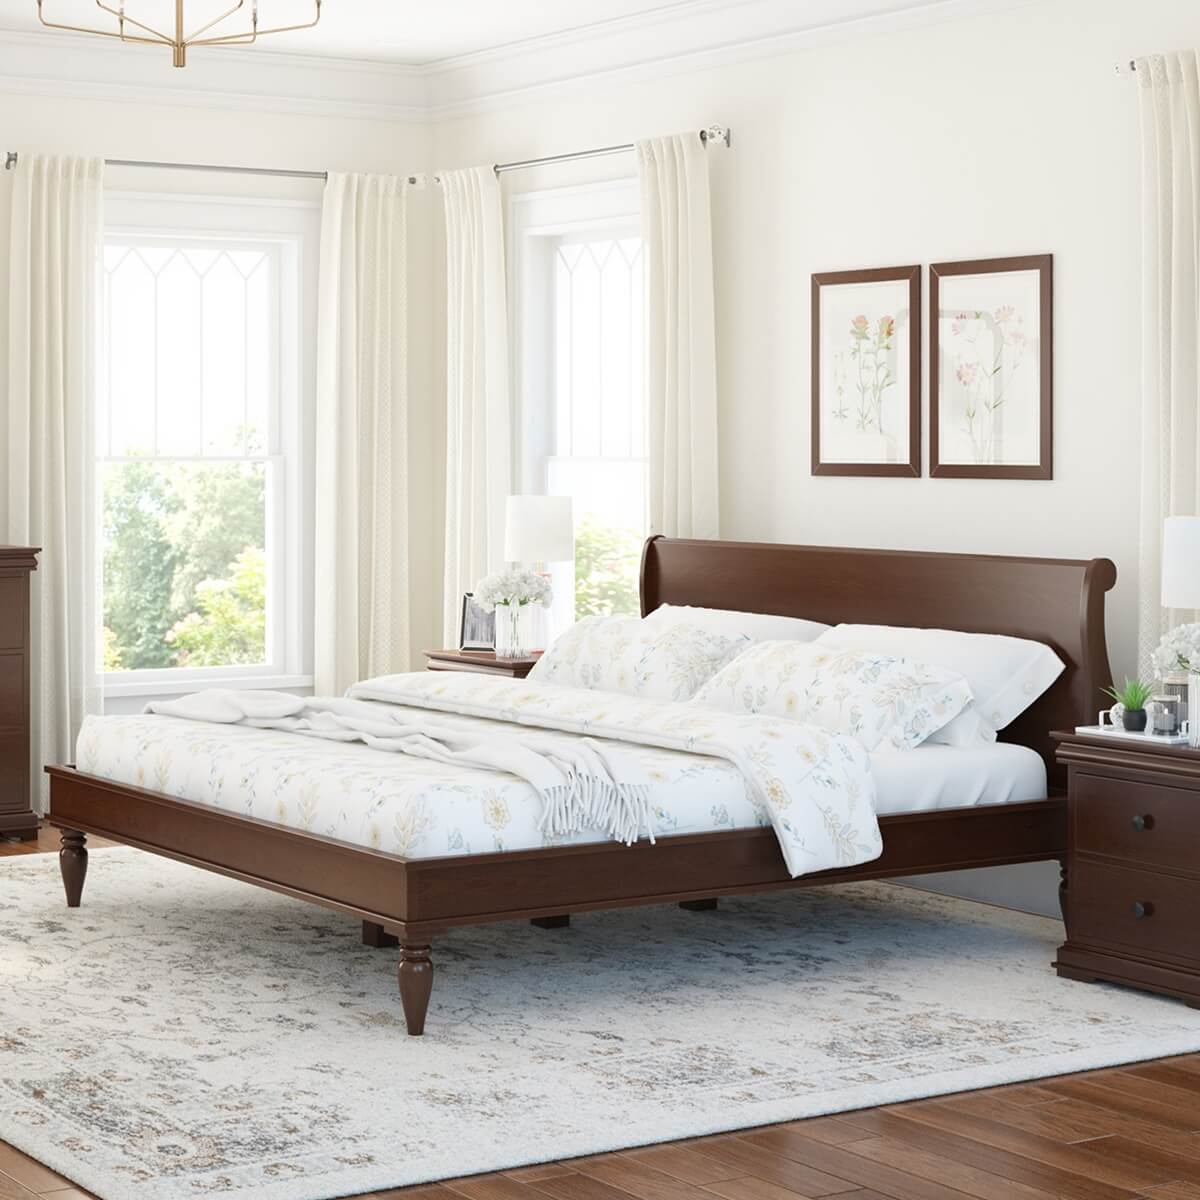 Classic King Sleigh Bed Frame